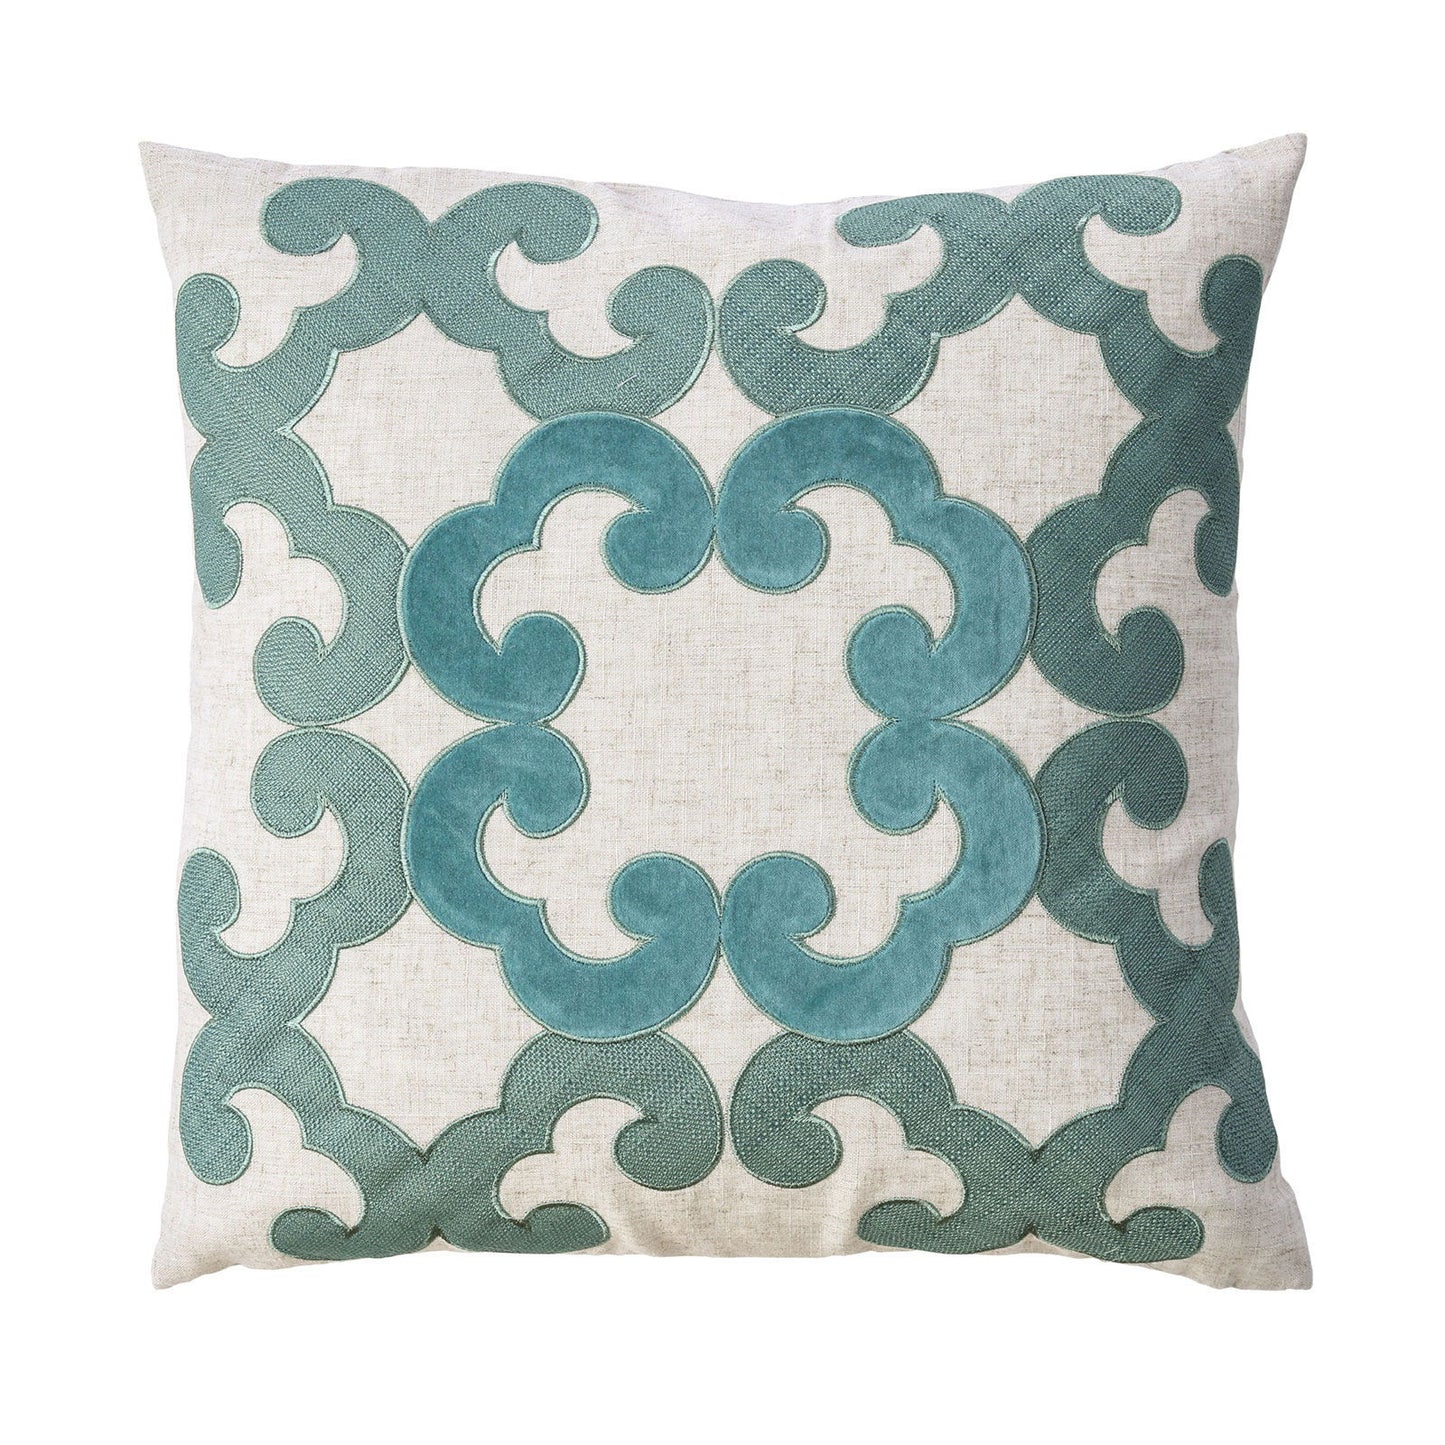 Lily - Pillow (Set of 2) - Beige / Teal